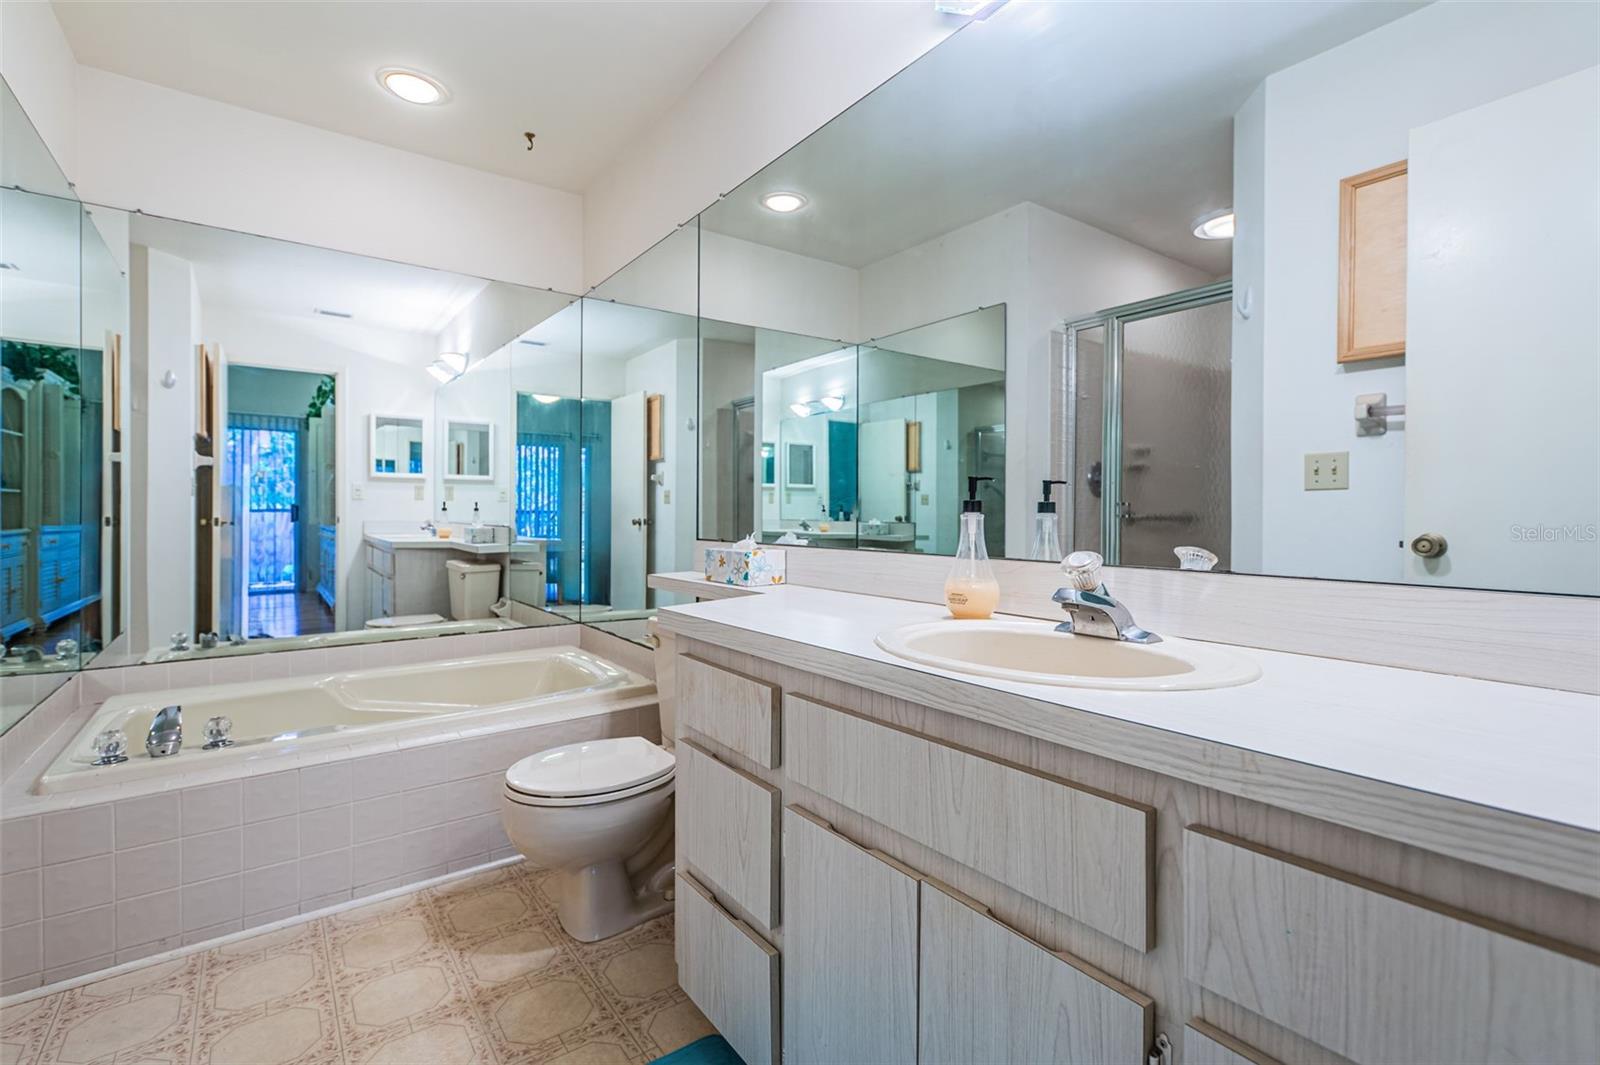 Master bathroom has both a tub and walk-in shower